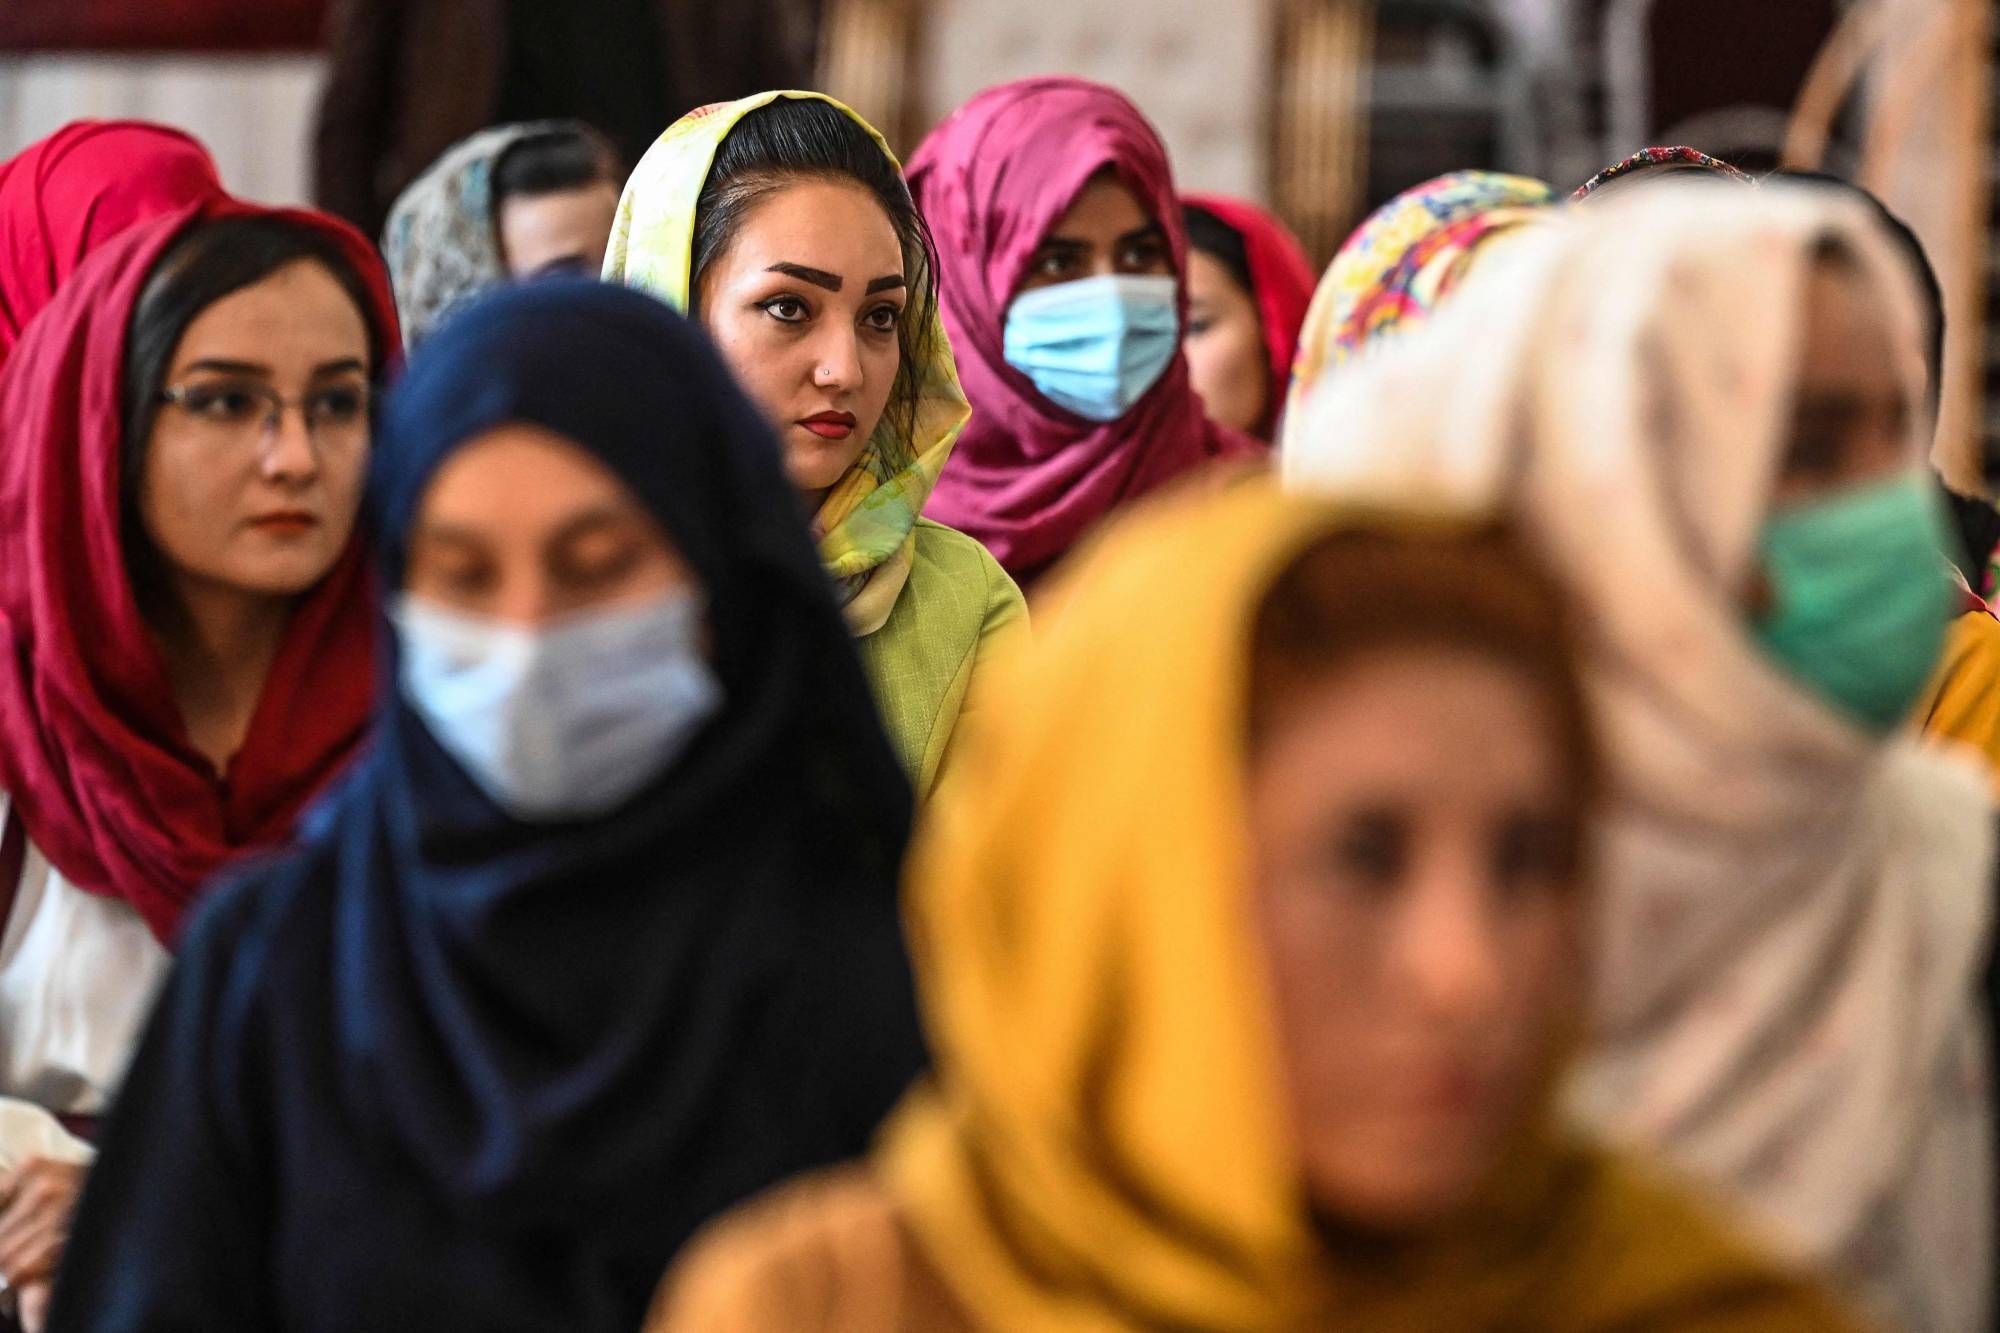 Afghanistan face veil decree: 'It feels like being a woman is a crime